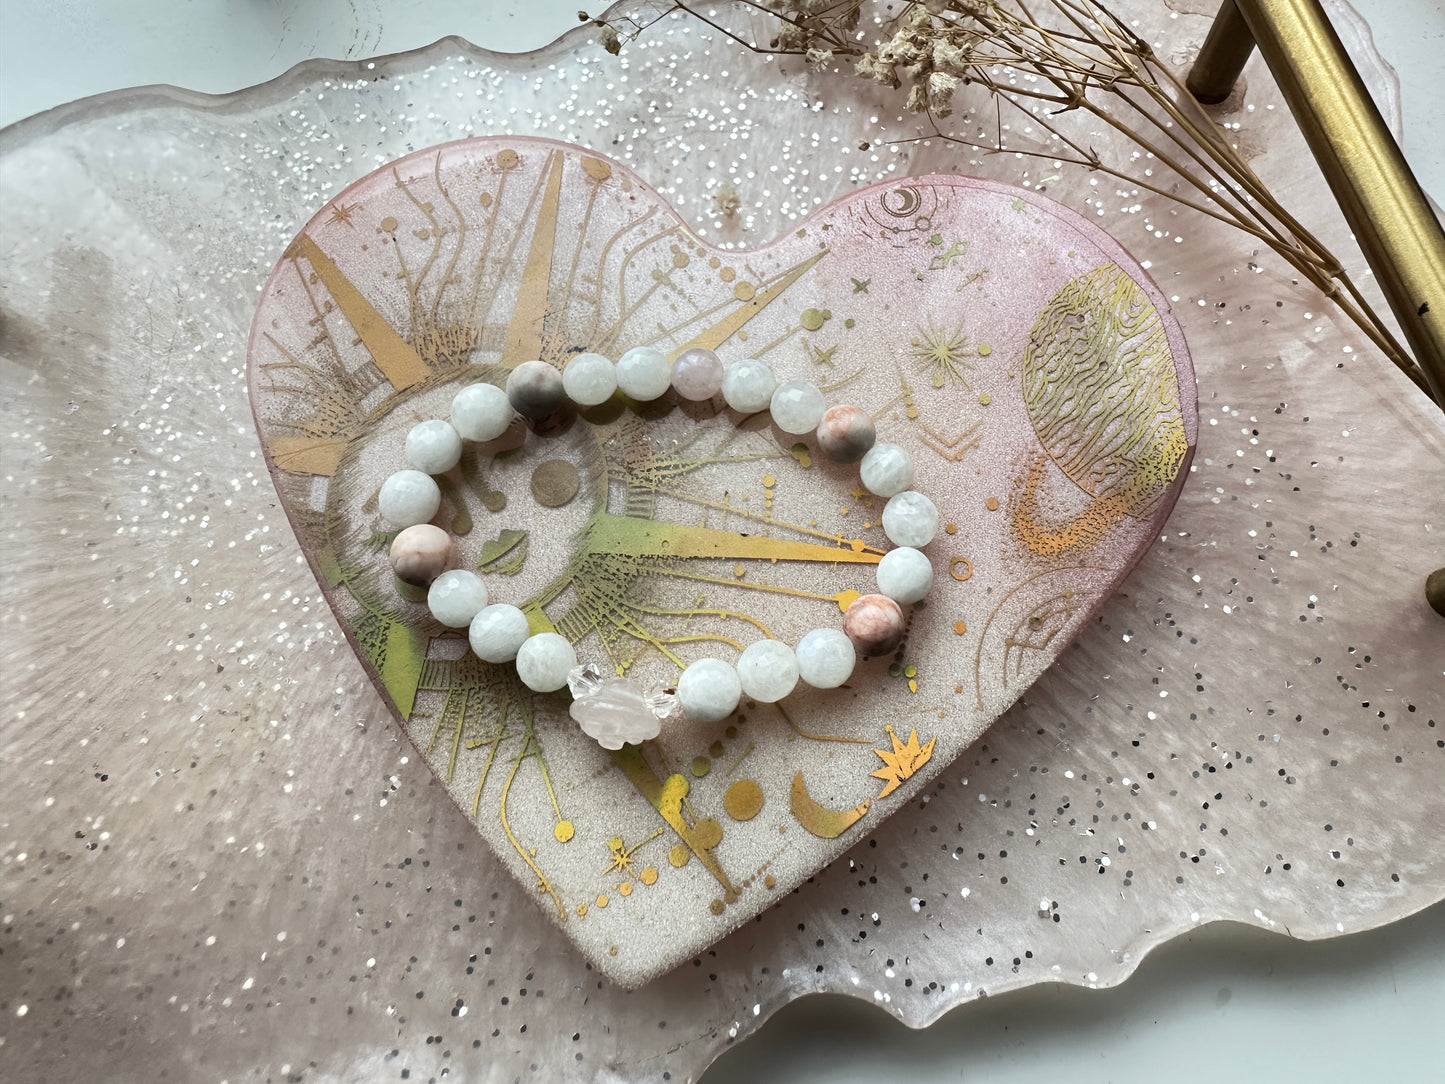 Rose beaded bangle with rainbow moonstone, pink opal and Swarovski crystals